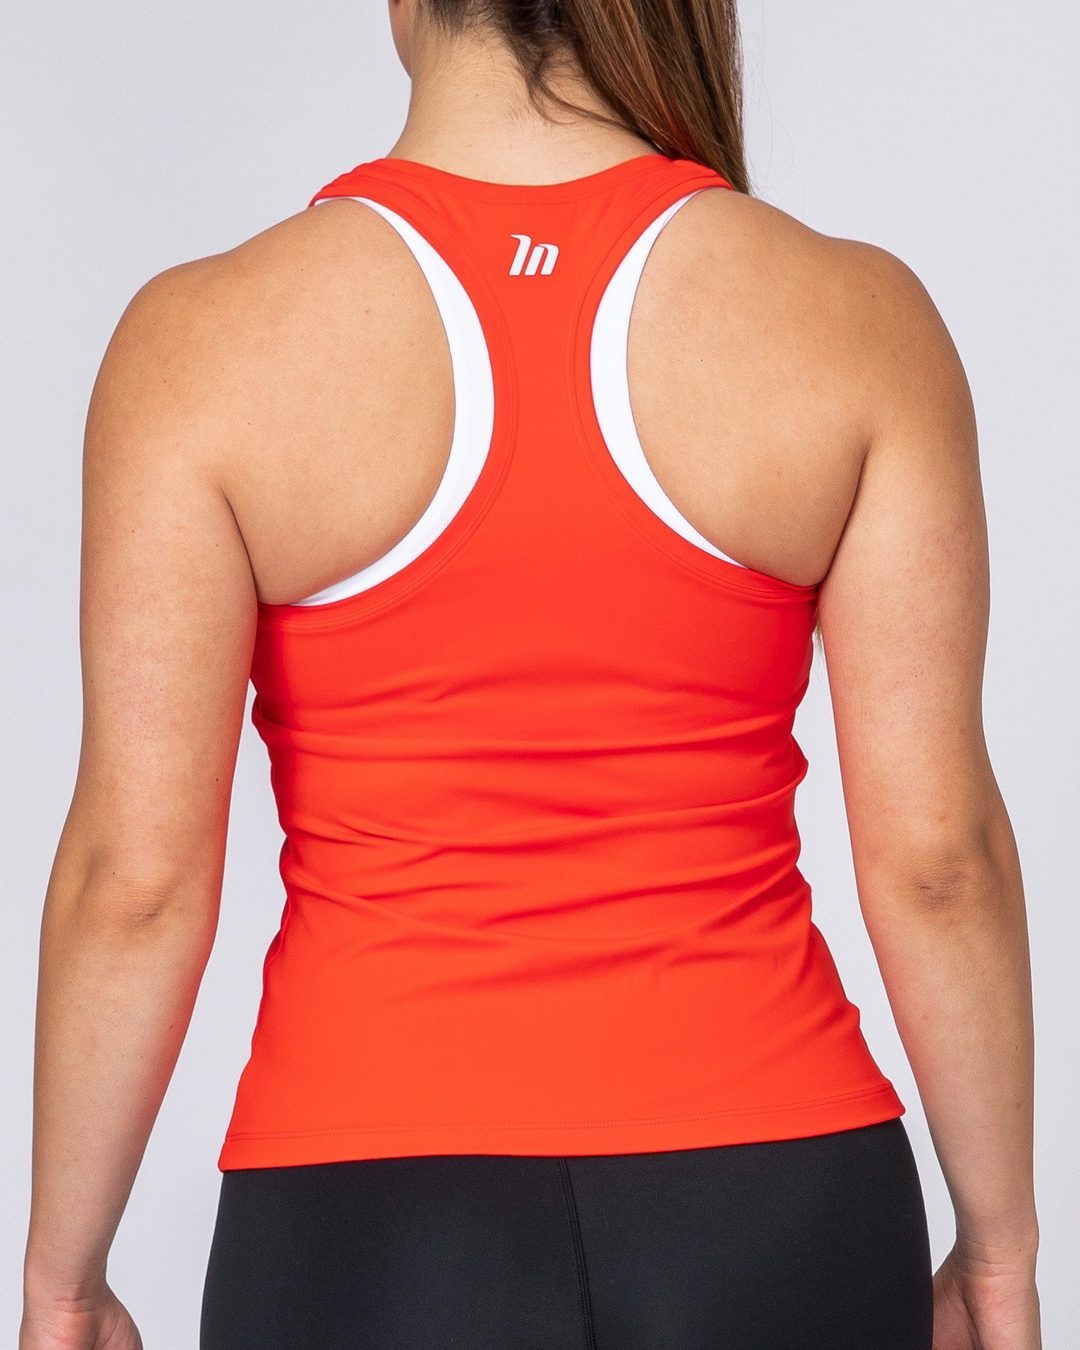 musclenation Motion Ultimate Racer Back - Infrared